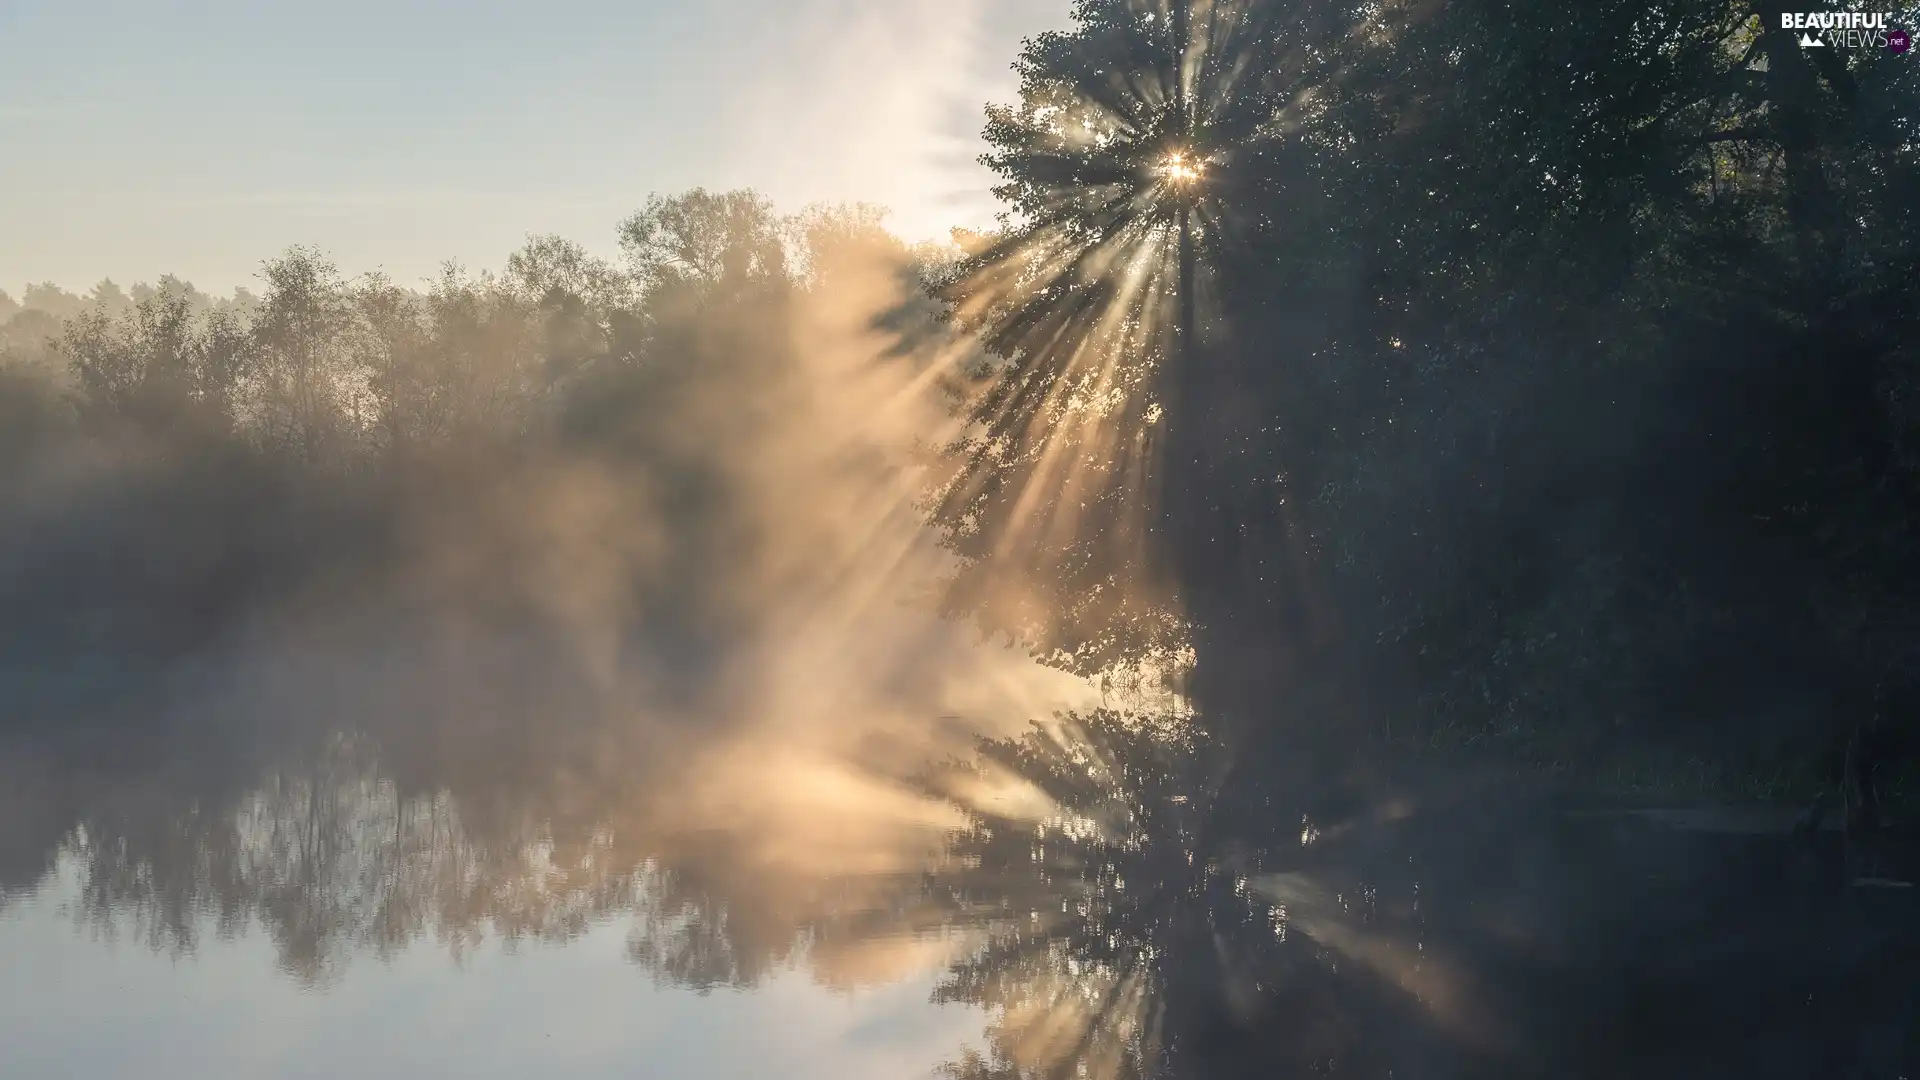 Fog, light breaking through sky, trees, viewes, River